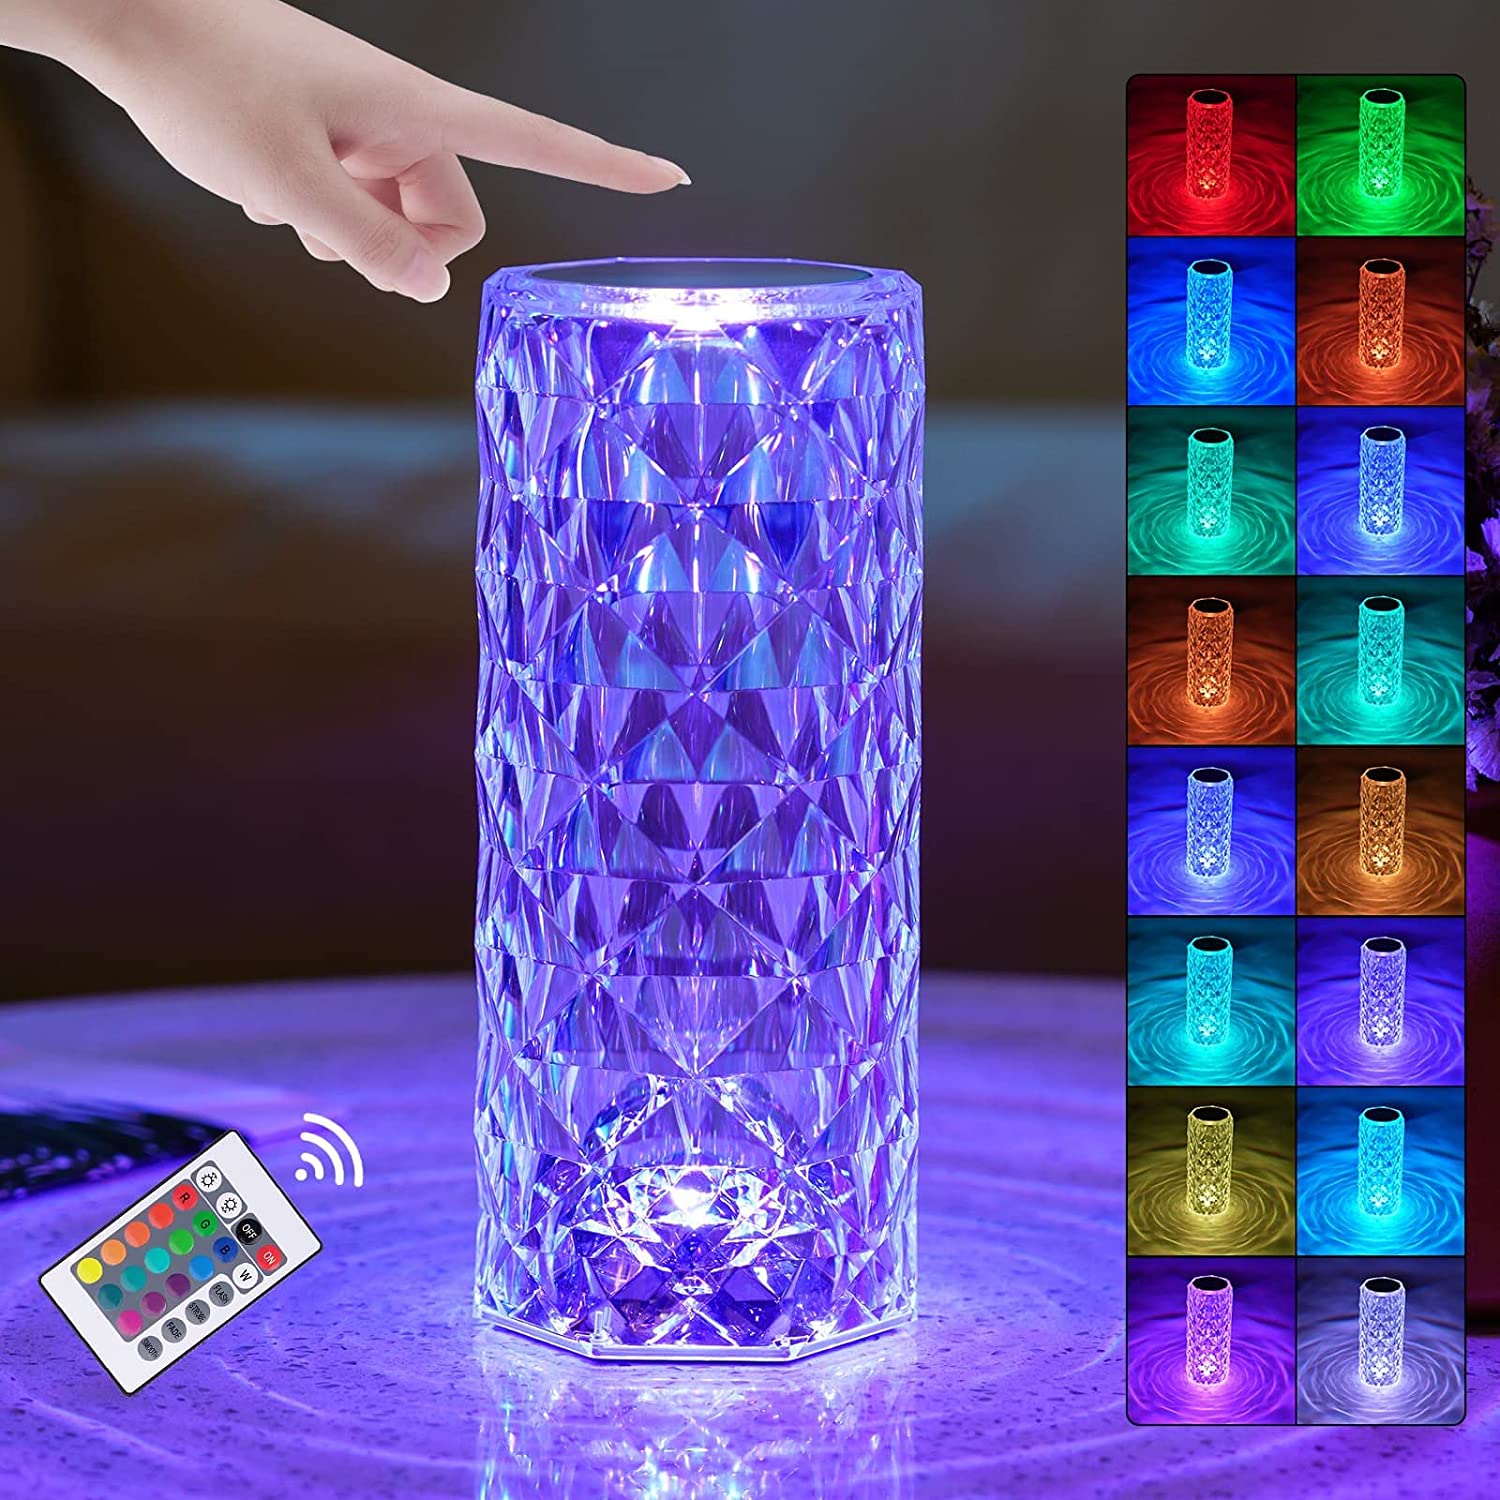 KU XIU Touch Crystal Lamp 16 Colors RGB Changing Crystal Table Lamp,Rose Diamond Acrylic Table Lamp with Remote Control & USB Port for Bedroom Bar - image 4 of 14